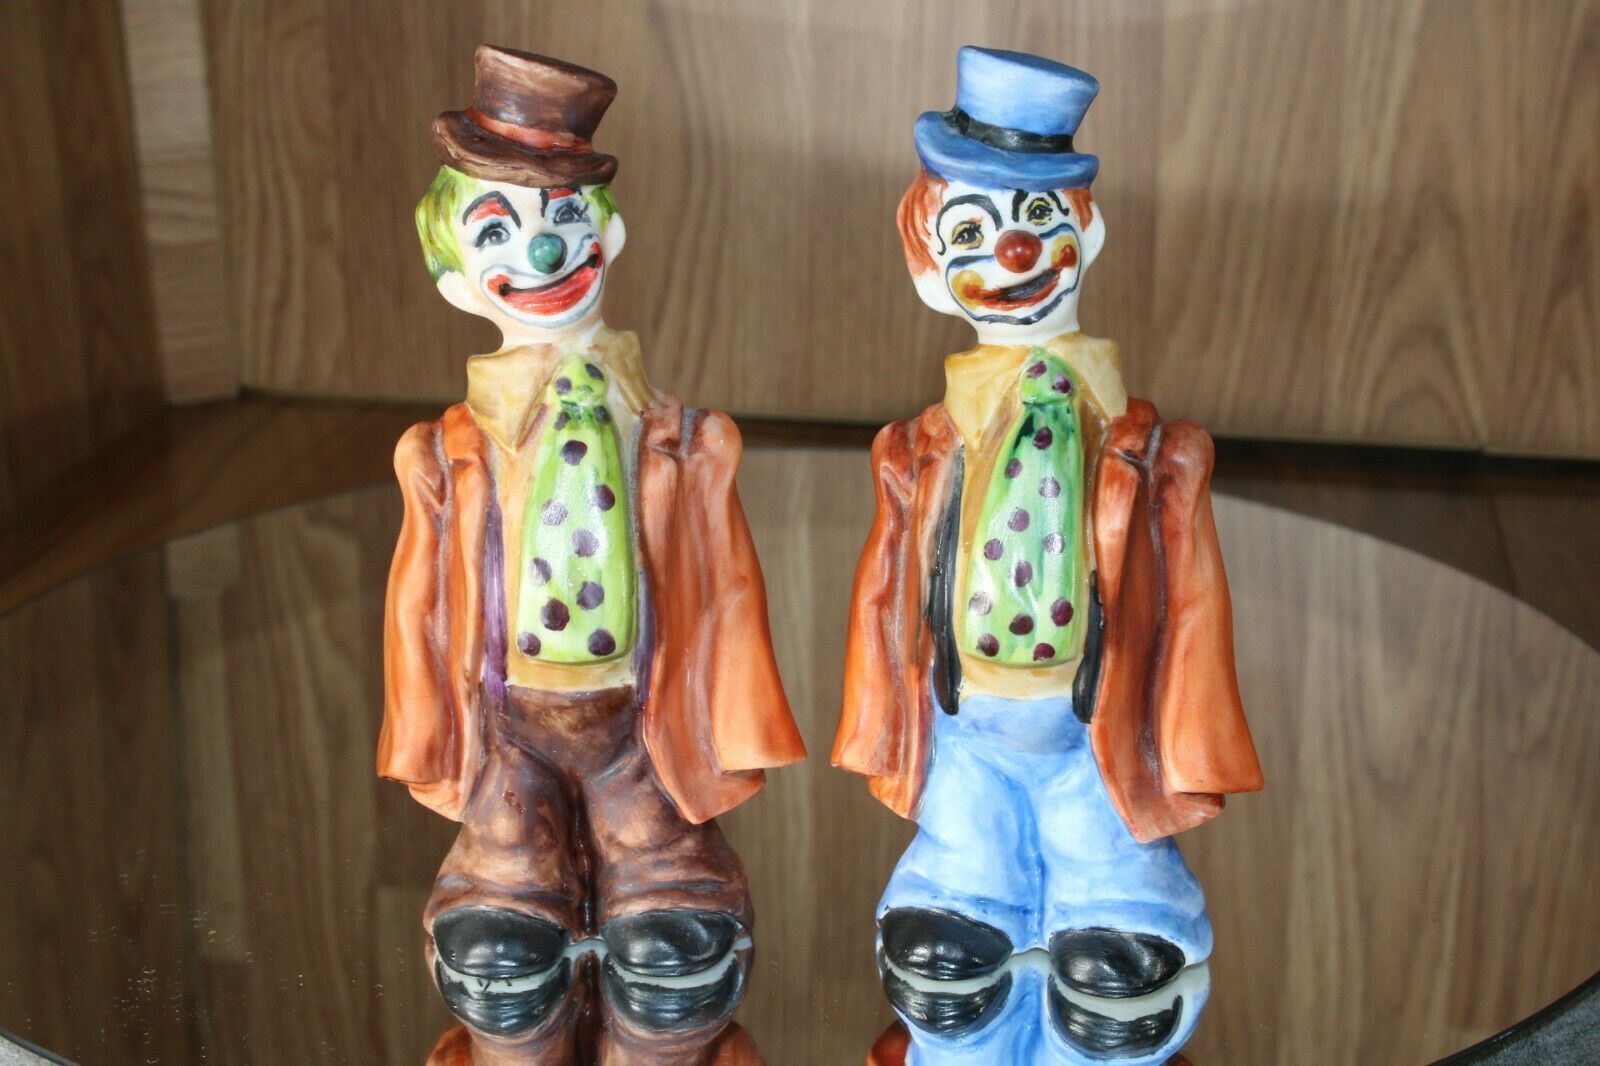 Vintage 1970s Hand Painted Ceramic Clown Figurines Set of 2 signed \